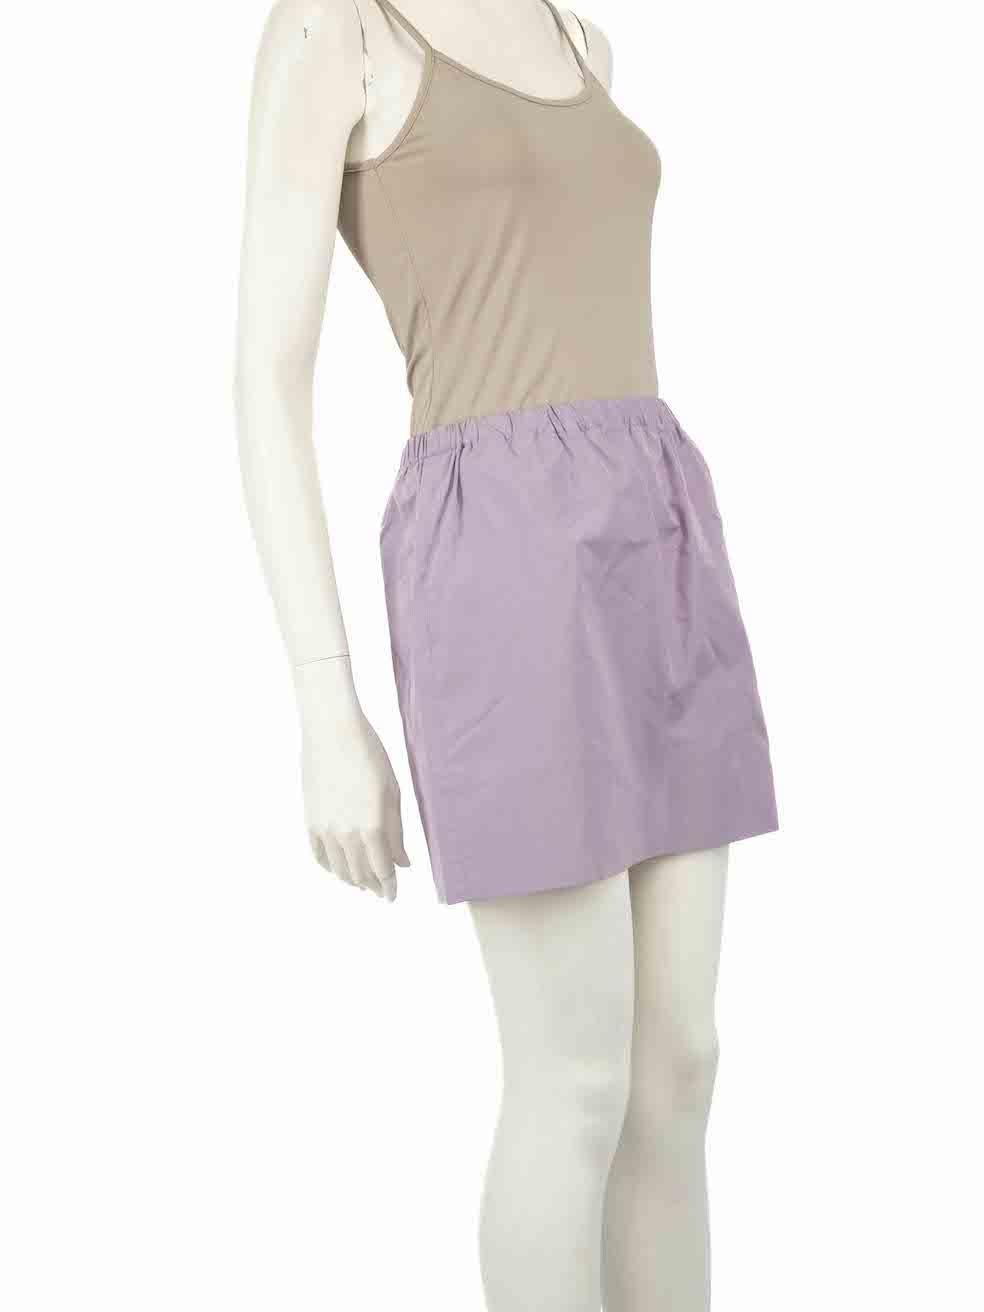 CONDITION is Good. General wear to skirt is evident. Moderate signs of discolouration to front and back of this used Miu Miu designer resale item.
 
 
 
 Details
 
 
 Purple
 
 Polyester
 
 Skirt
 
 Mini
 
 Elasticated waist
 
 
 
 
 
 Made in